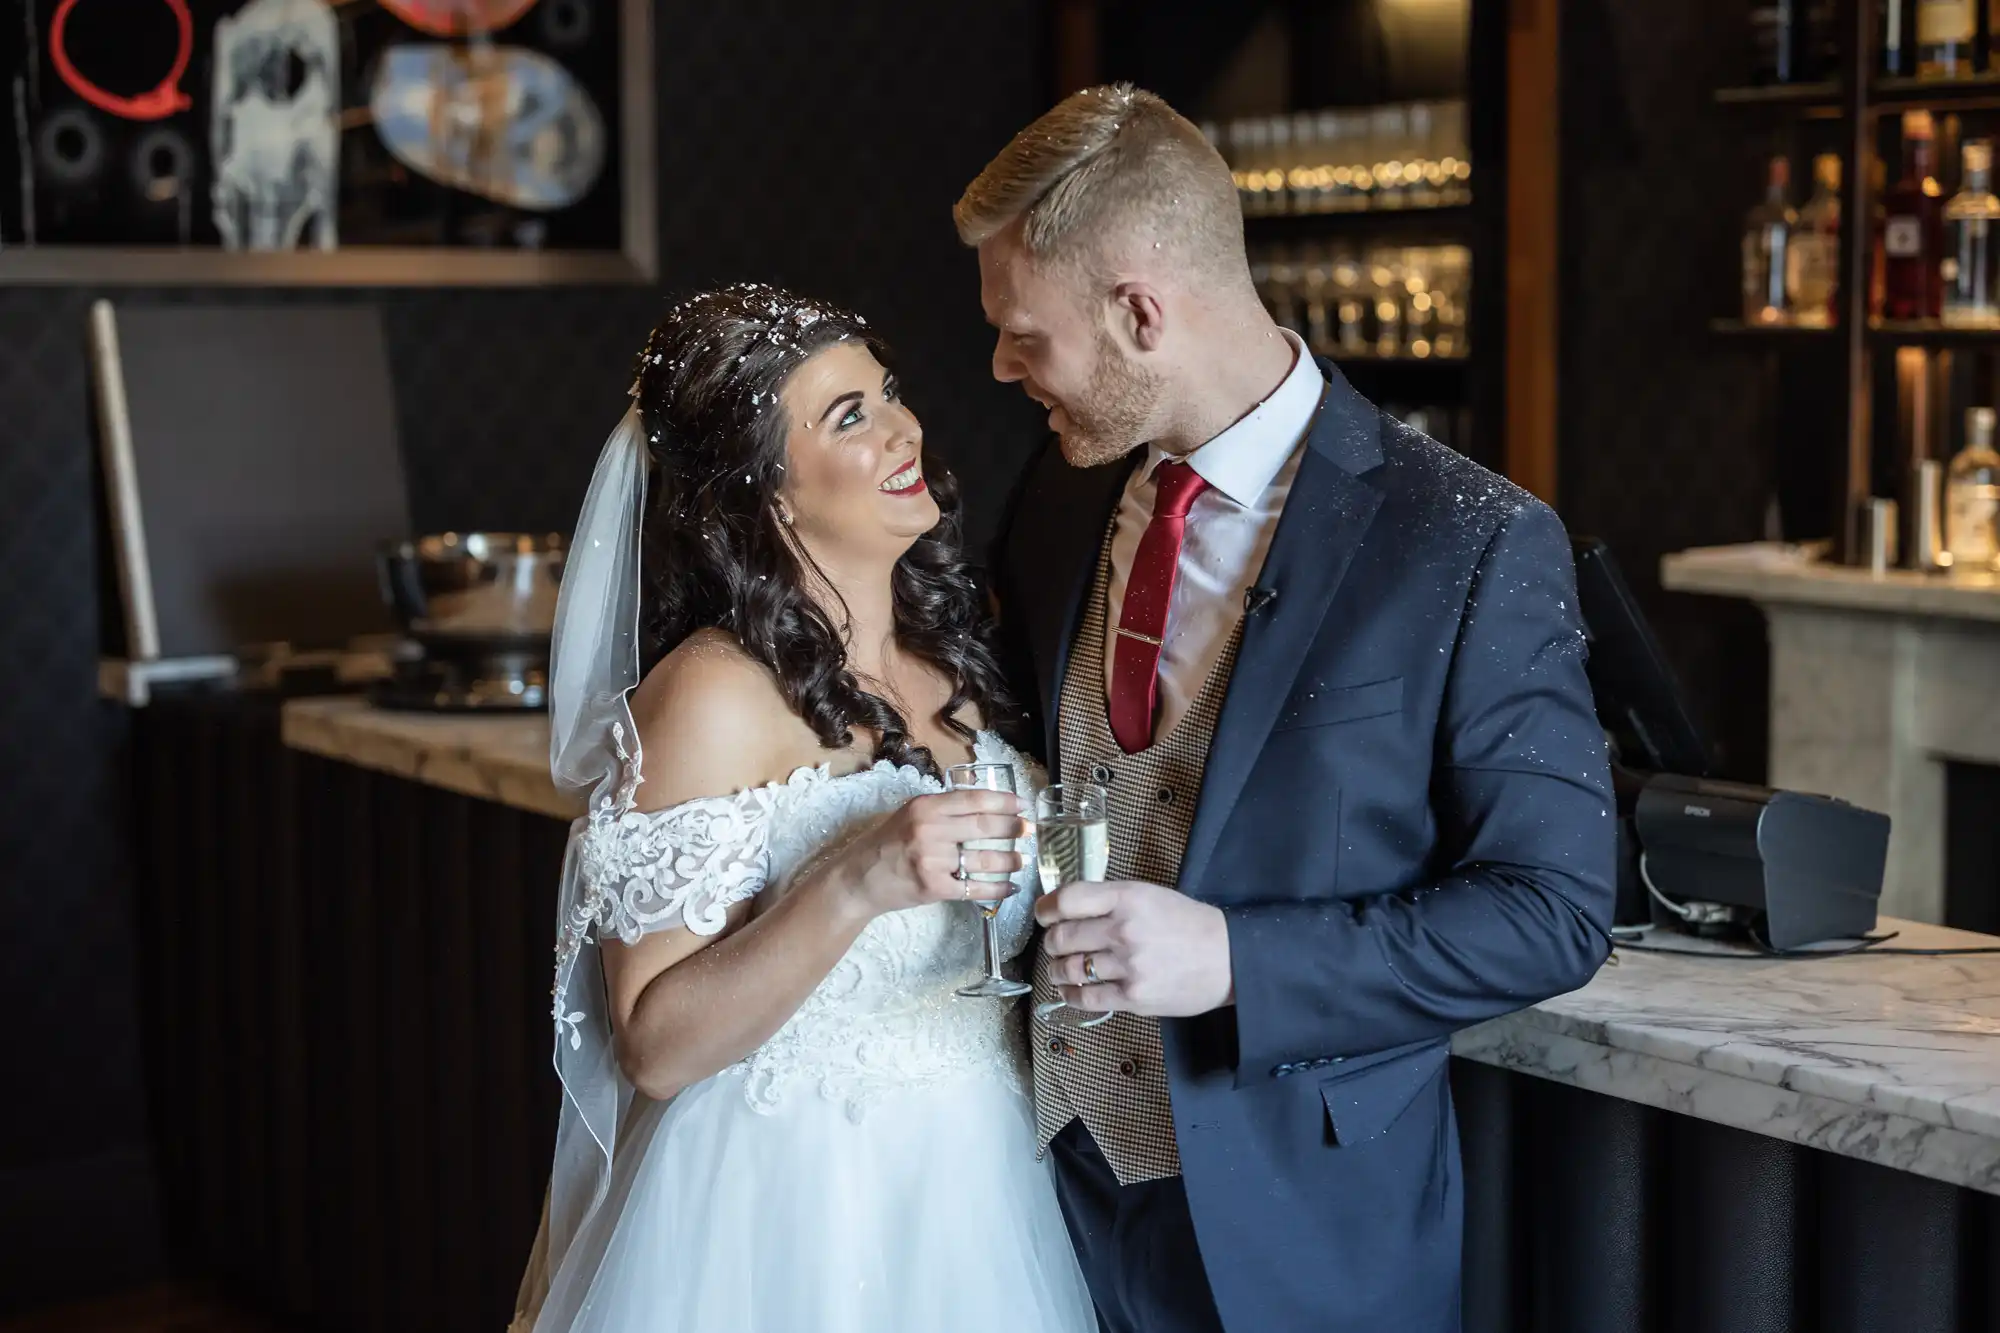 A bride and groom, dressed in a wedding gown and suit, smile and look into each other's eyes while holding champagne glasses in a bar.